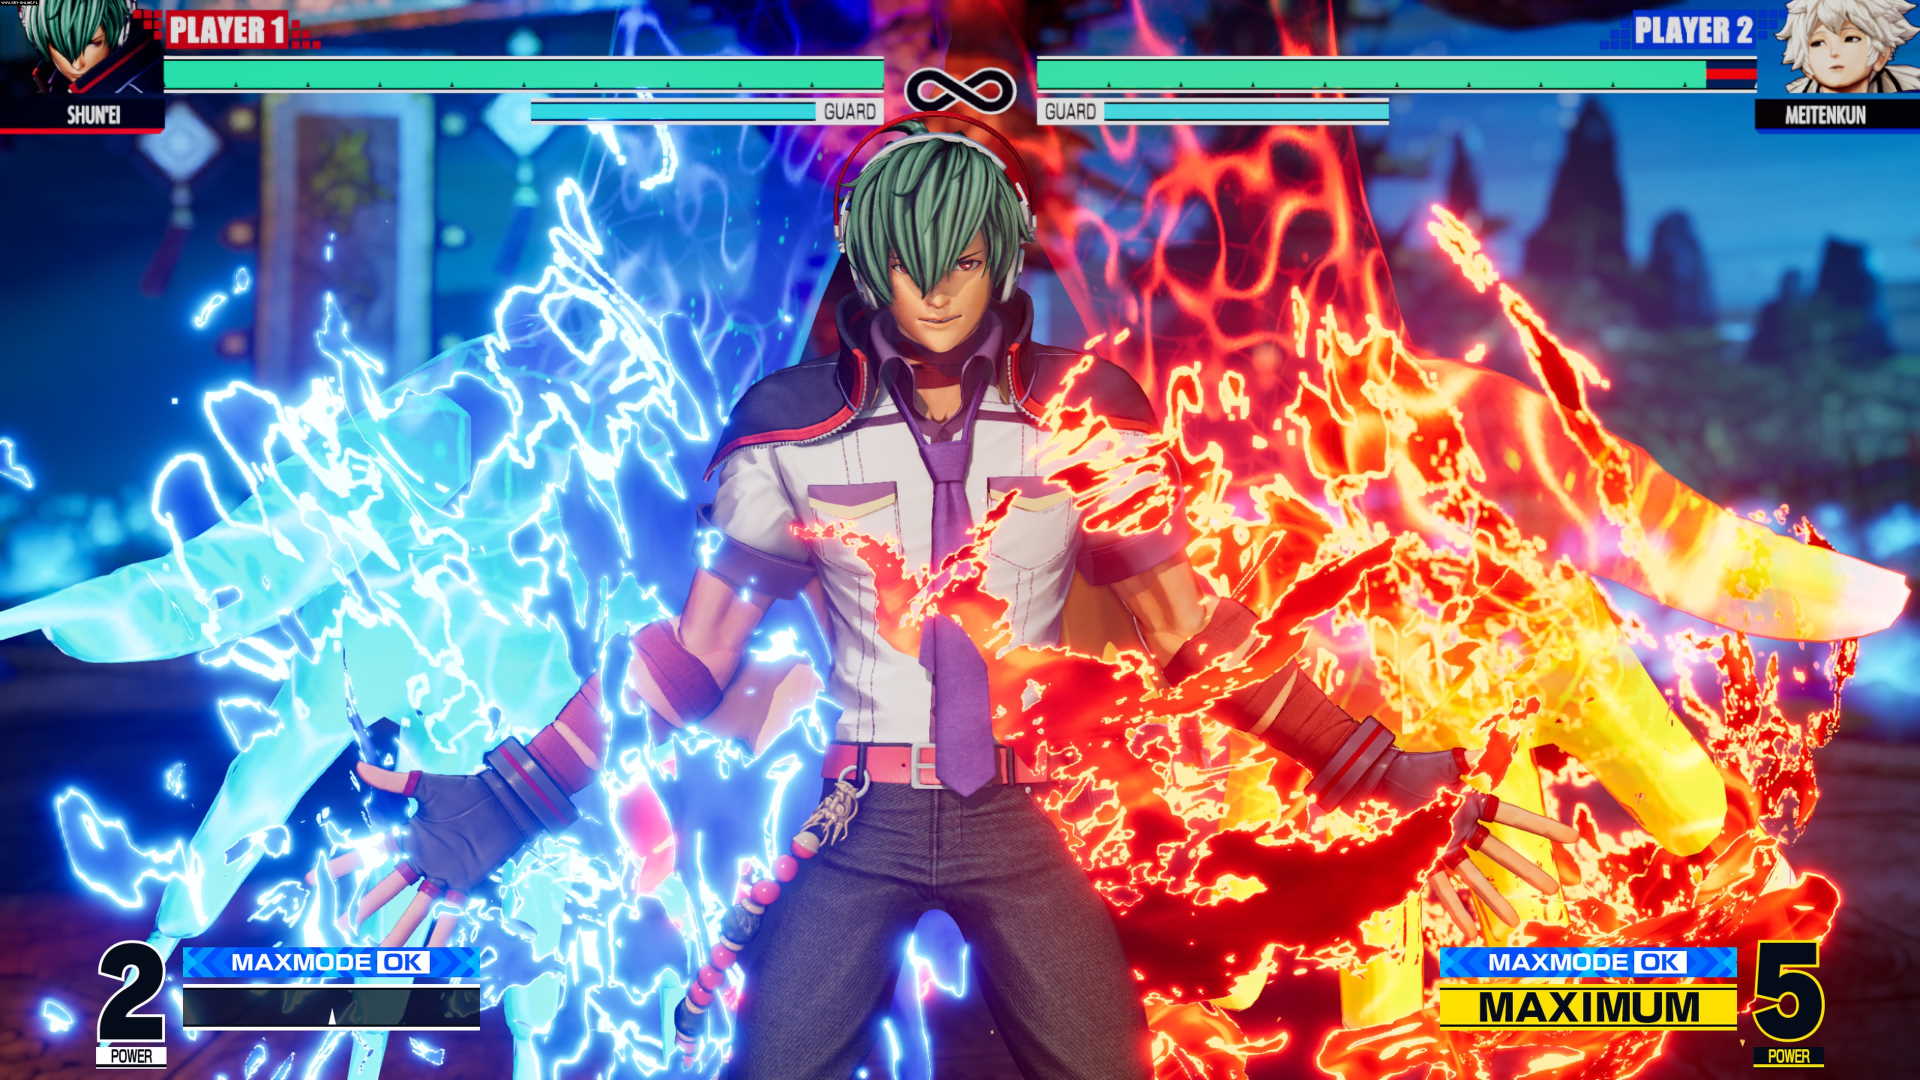 The King of Fighters XV: MAX mode